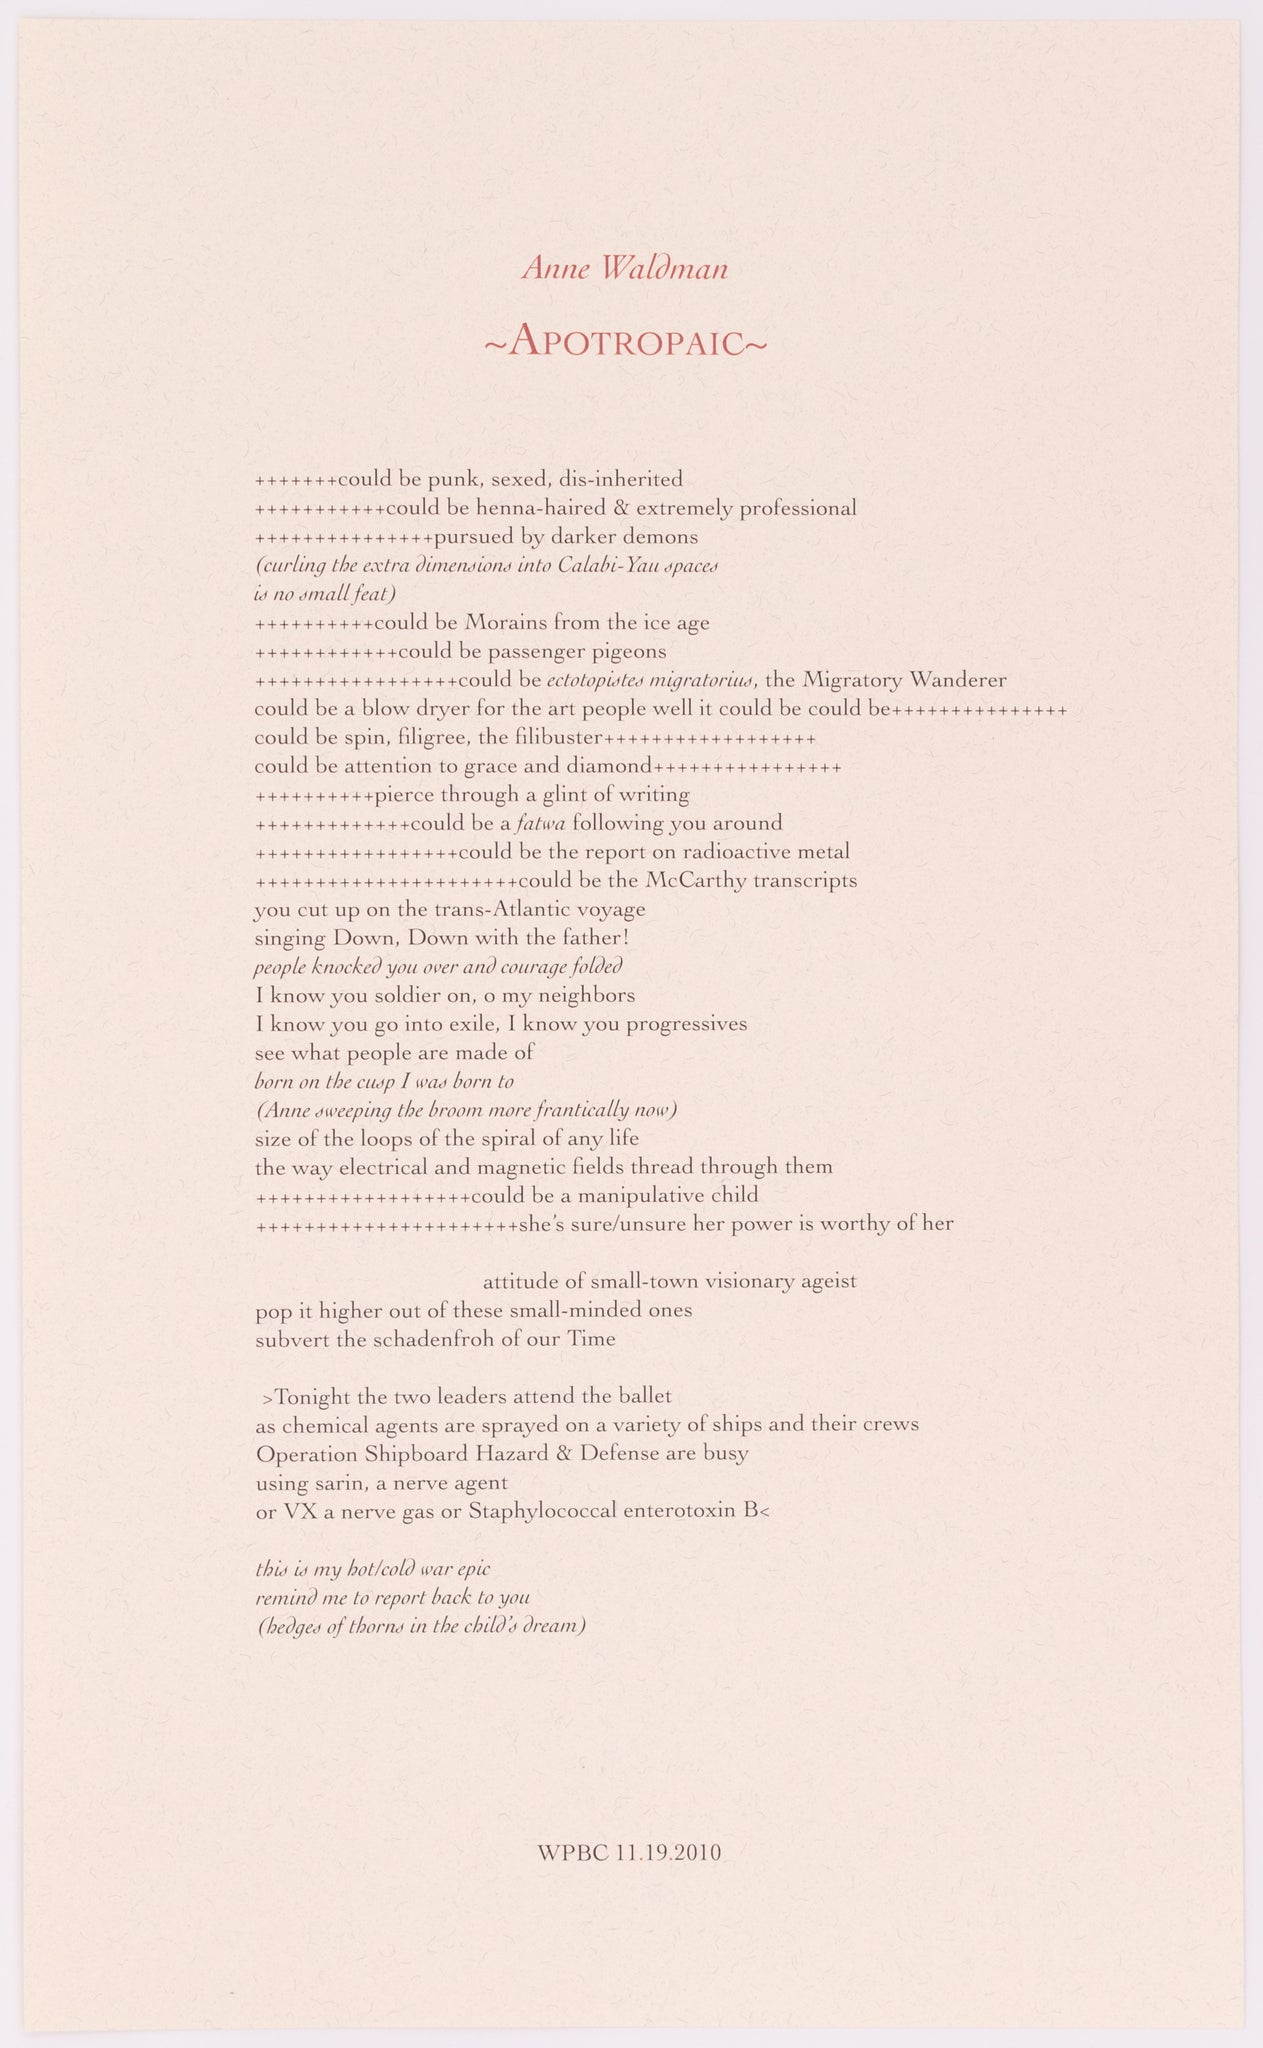 Broadside by Anne Waldman titled Apotropaic. Red and black text on cream paper